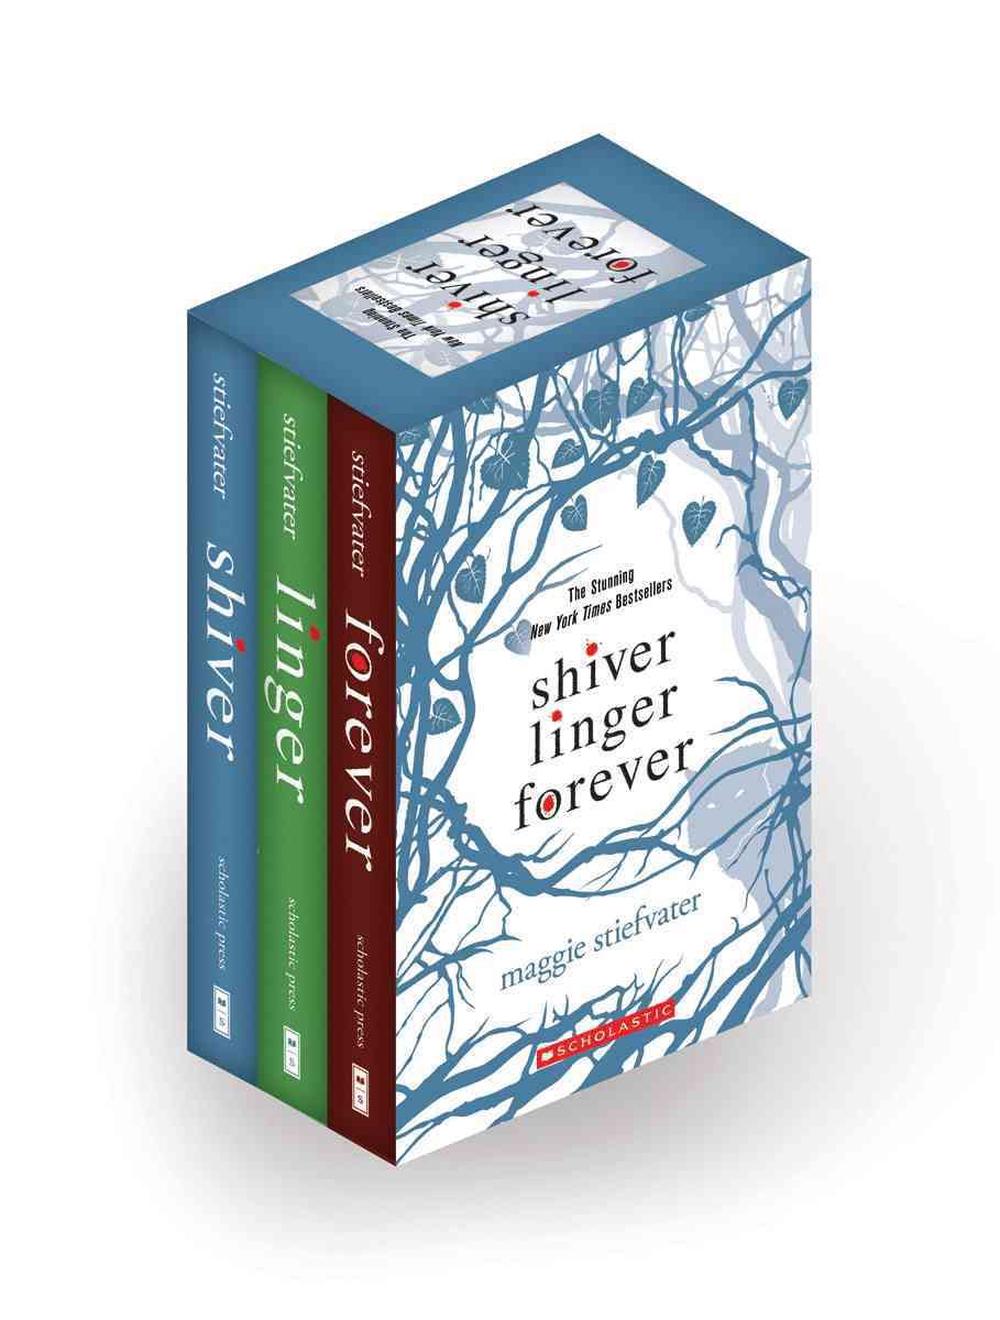 Forever by Maggie Stiefvater